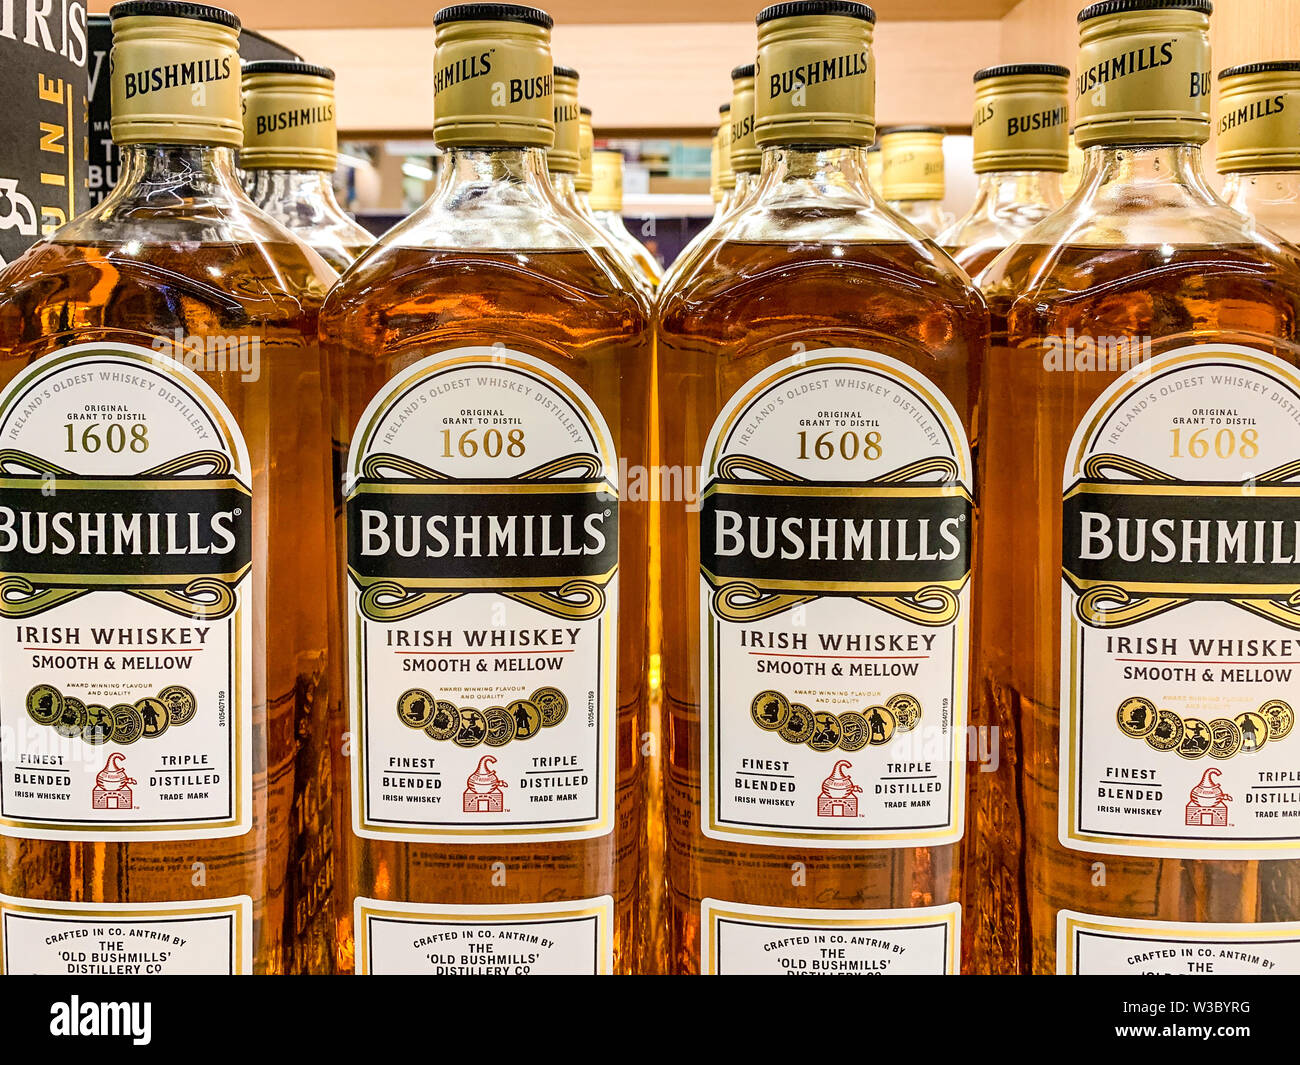 Bottles of Bushmills on display in a shop. The Old Bushmills Distillery is a whiskey distillery in Bushmills, County Antrim, Northern Ireland. Istanbu Stock Photo